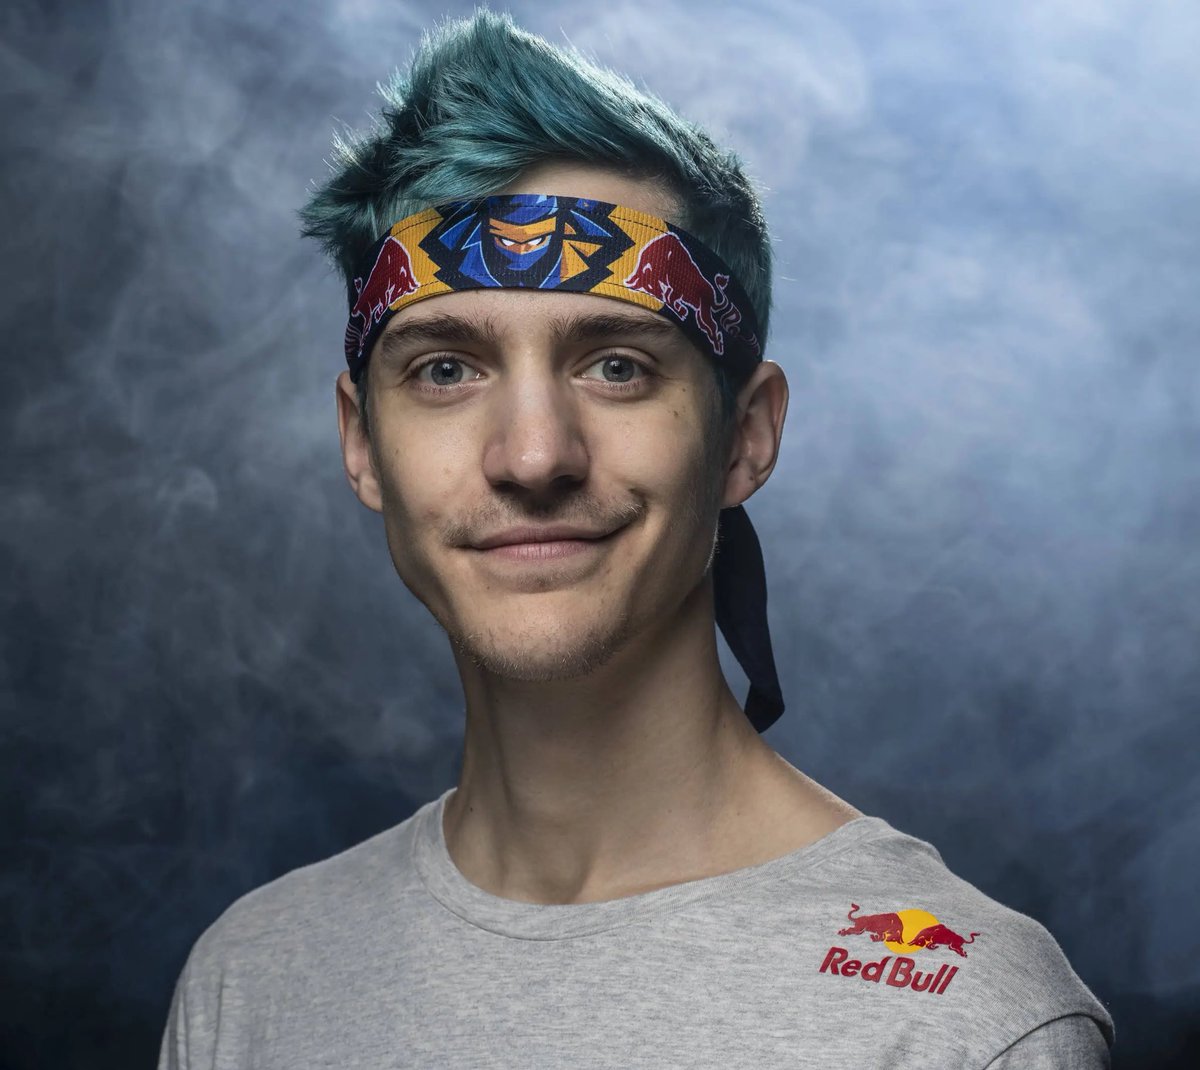 Soda On Twitter That Picture Of Ninja Got Me Thinking Bout Andrew 